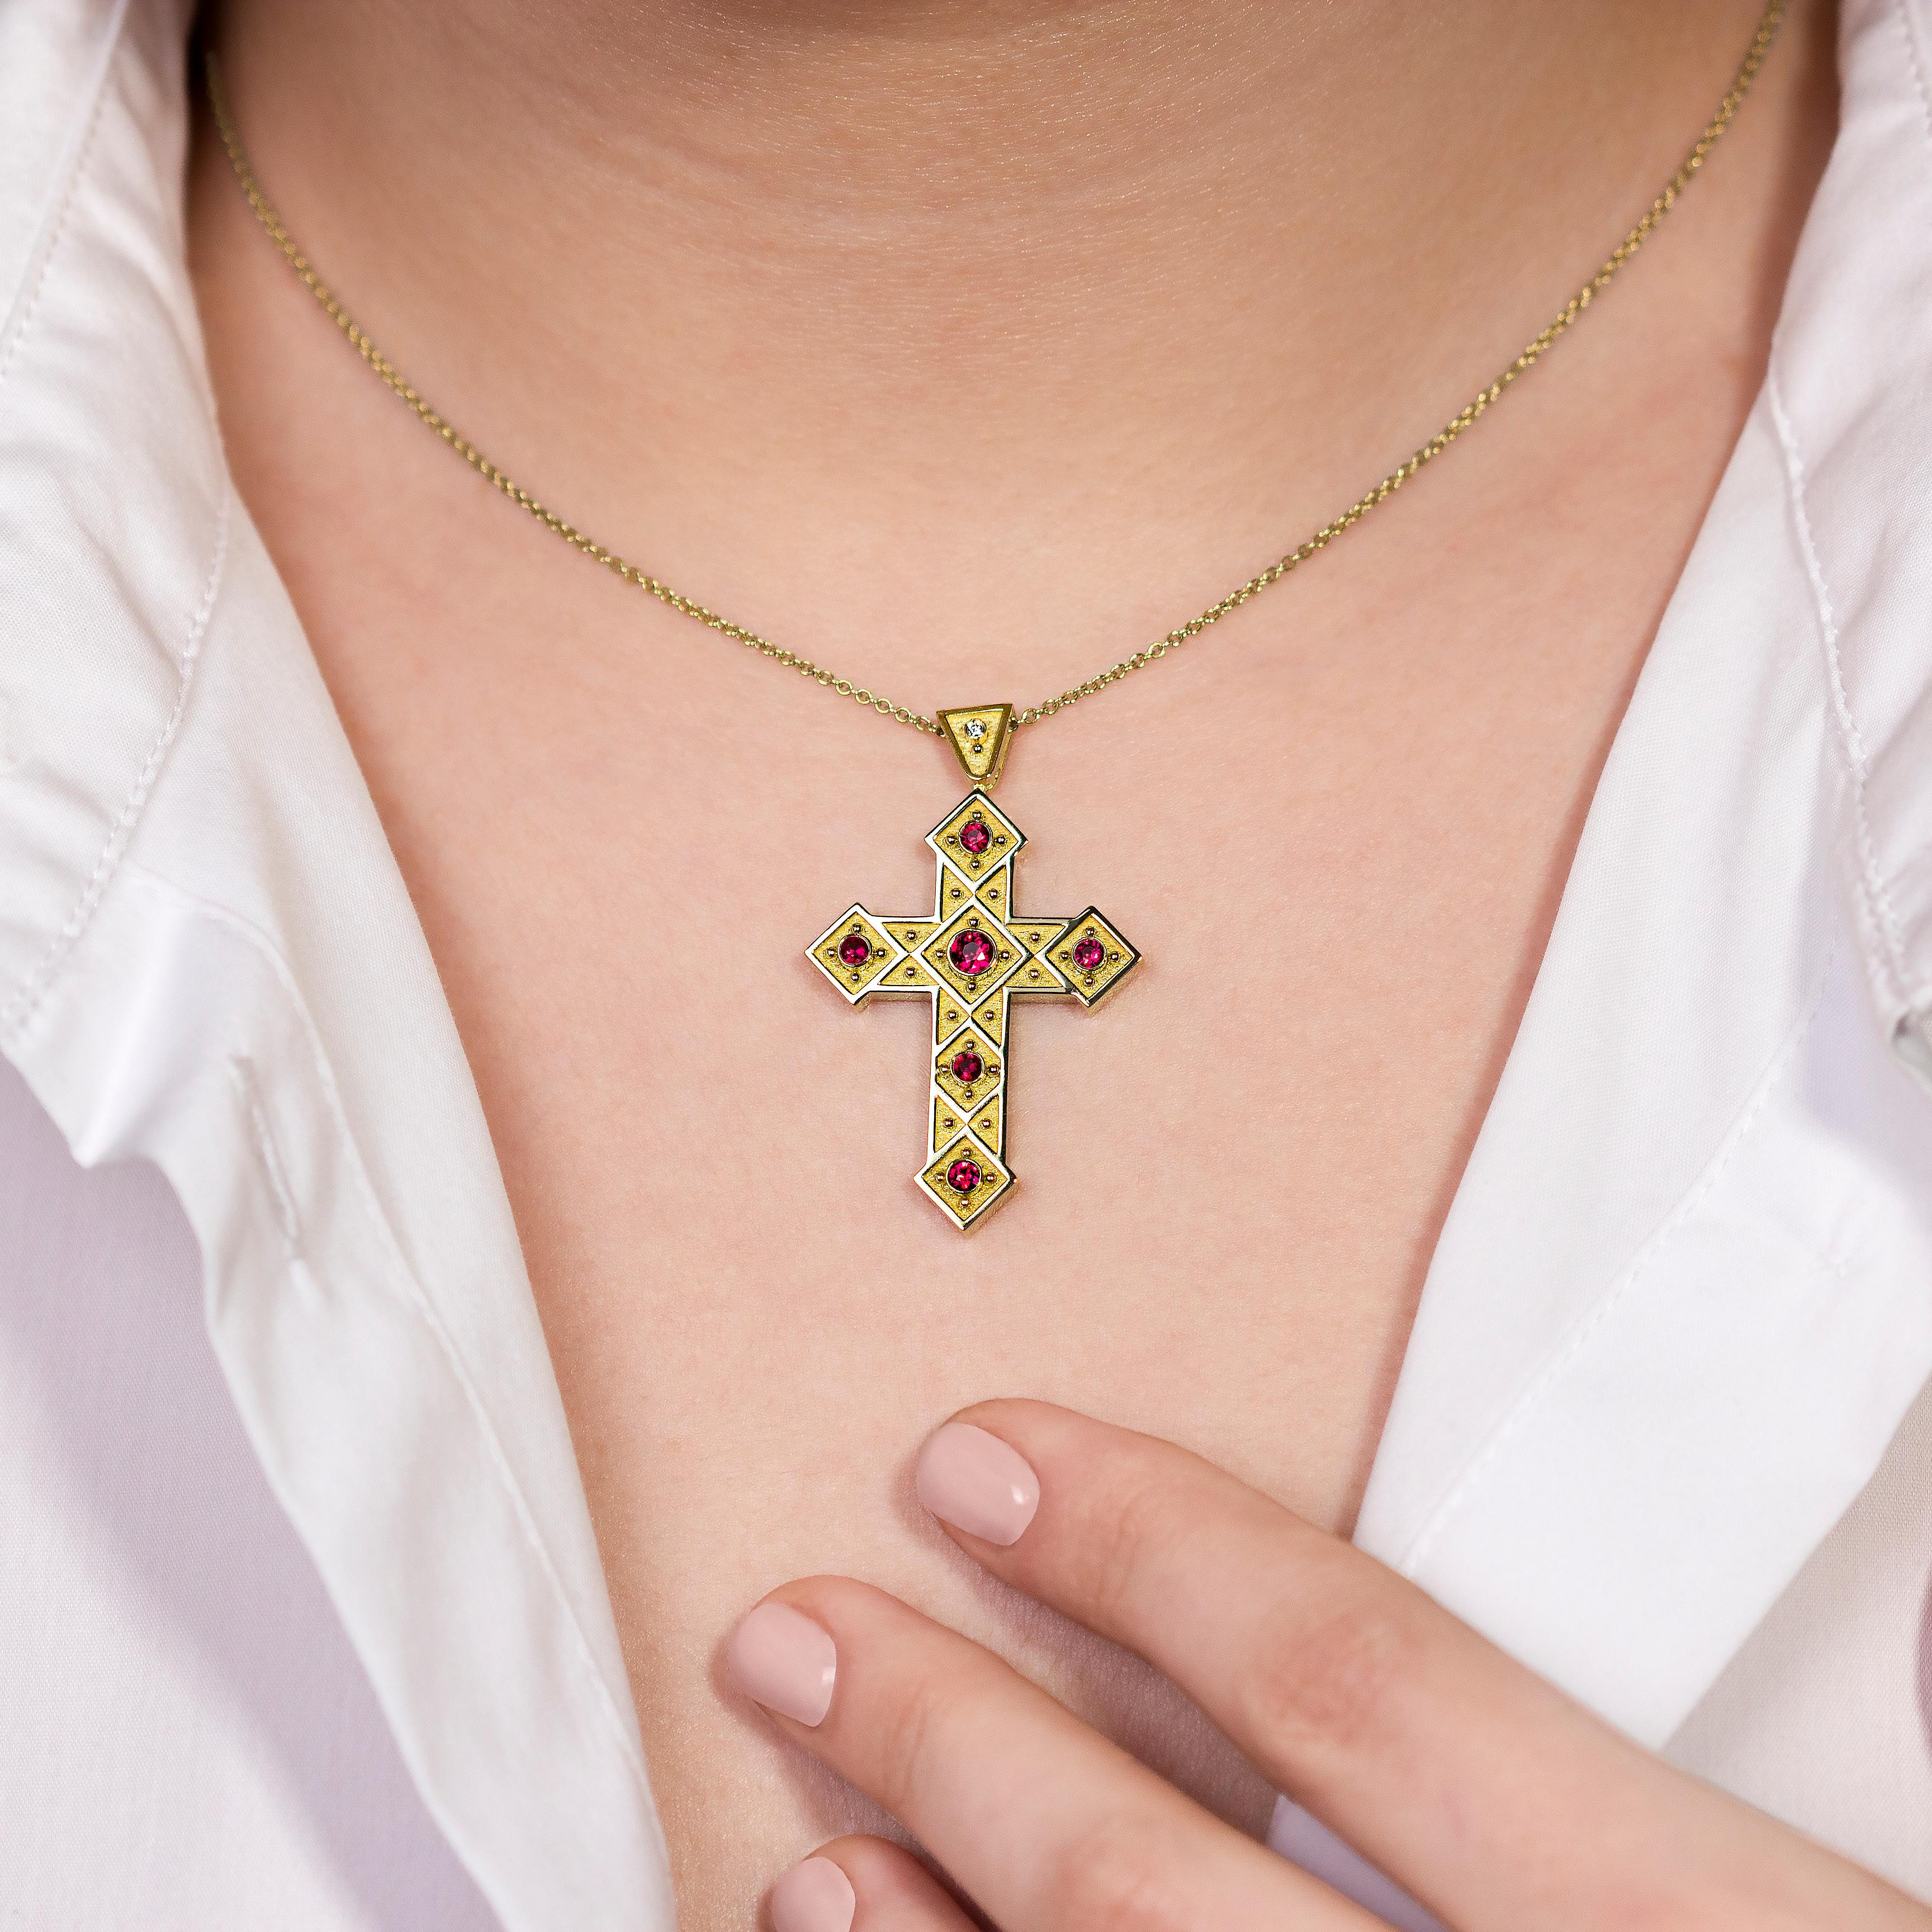 This exquisite Byzantine cross pendant is a radiant masterpiece, where glistening squares intertwine with the fiery brilliance of radiant rubies, celebrating the artistry of ancient craftsmanship and opulent beauty in every detail.

100% handmade in